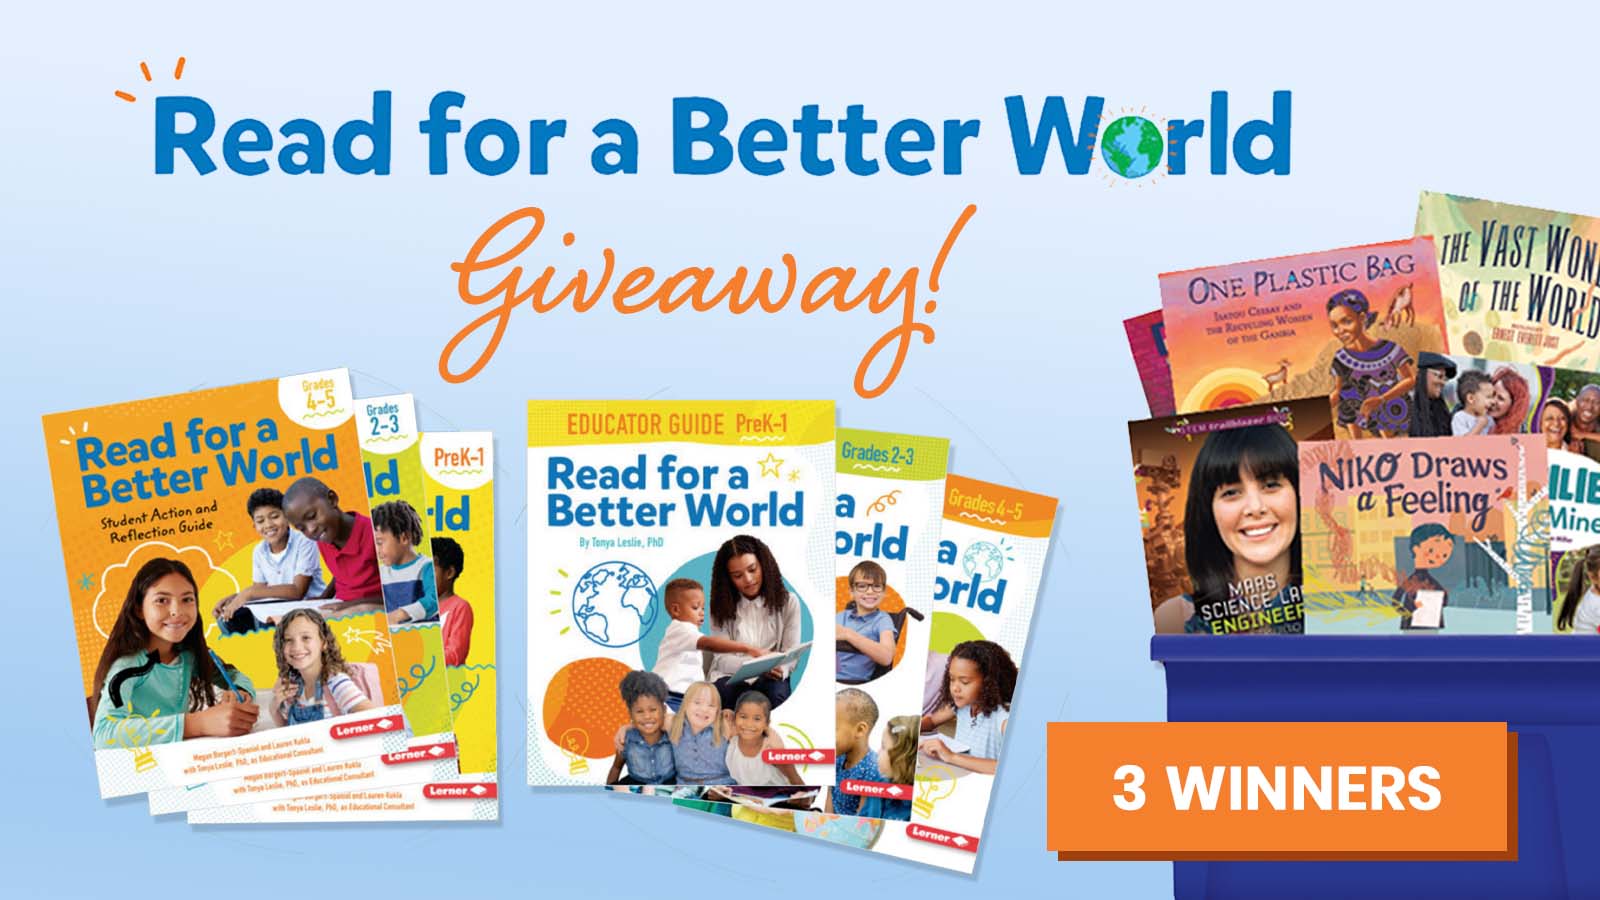 Read for a Better World giveaway!